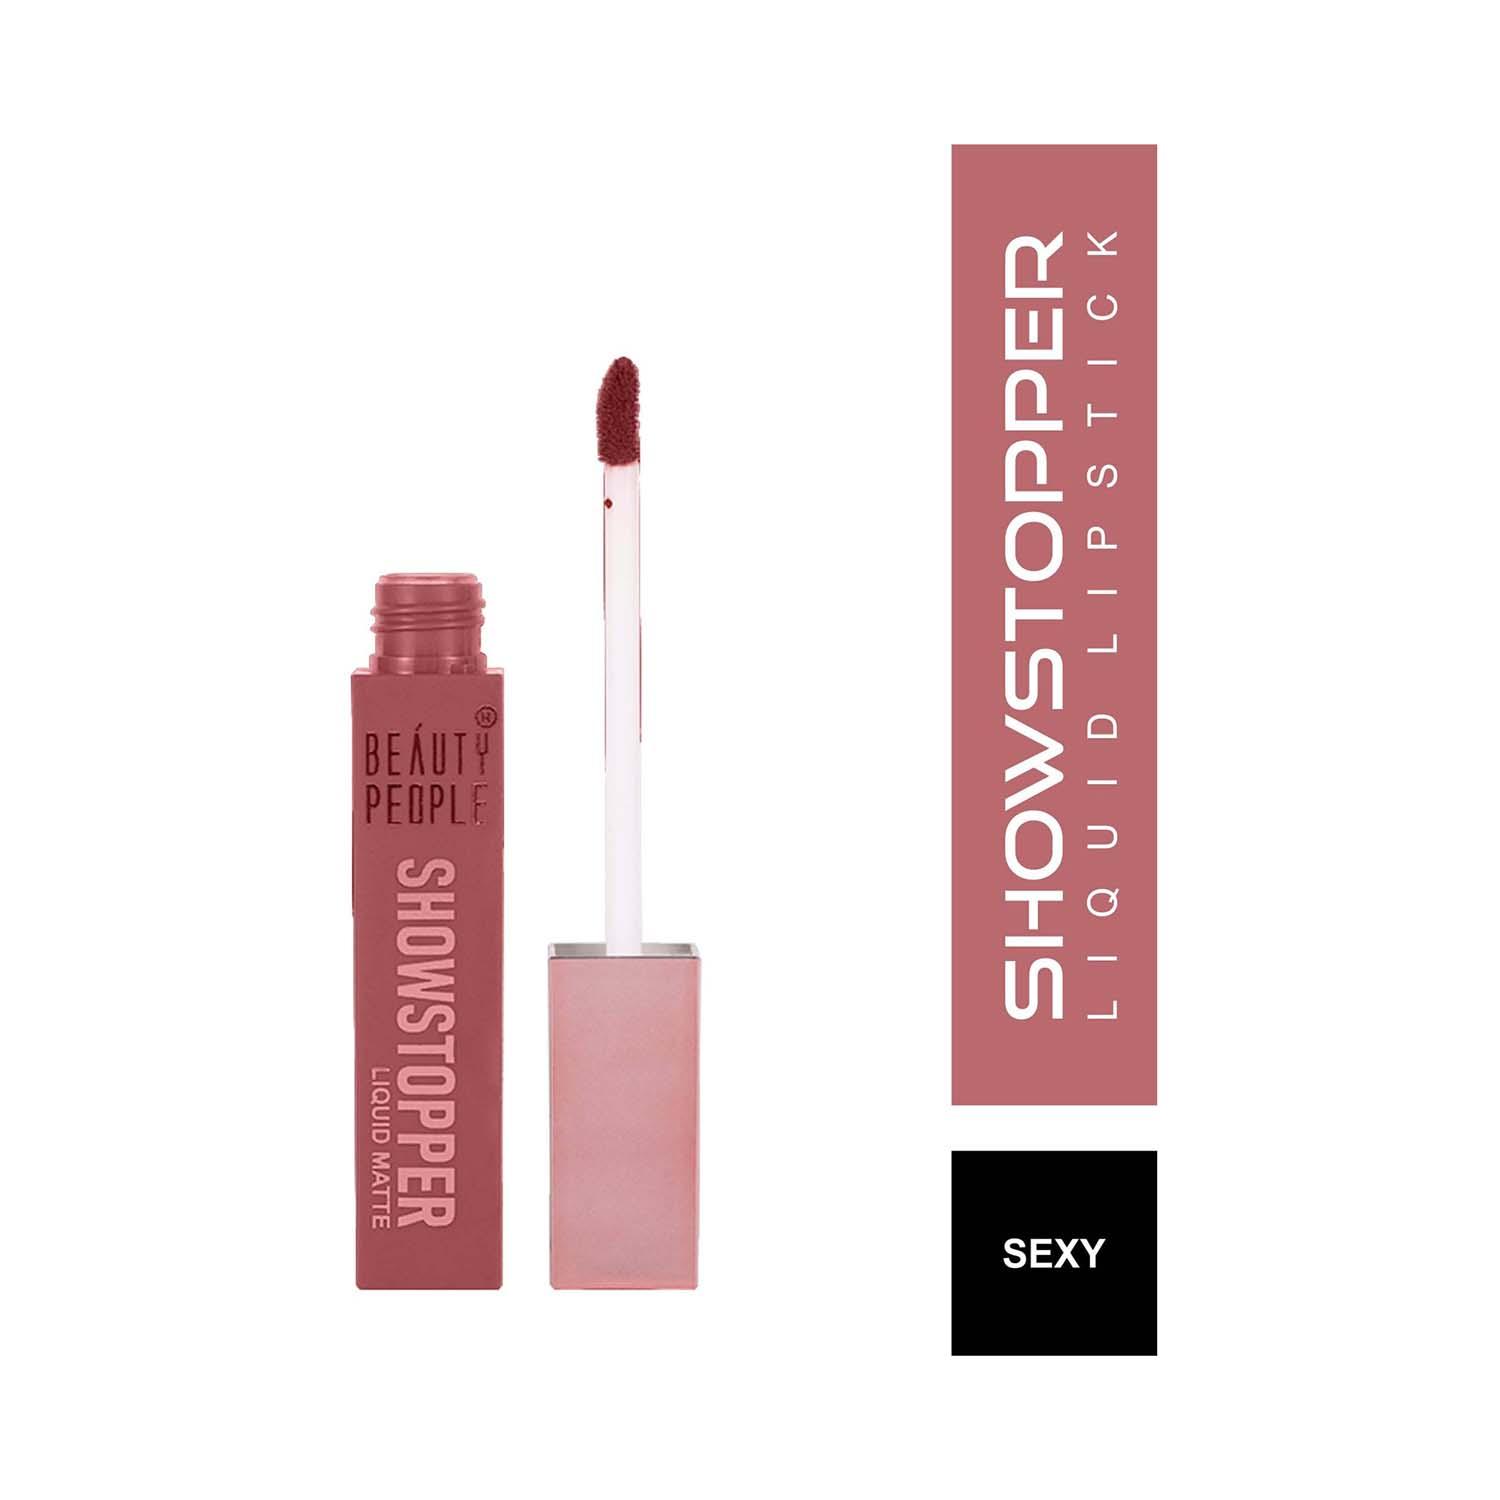 Beauty People | Beauty People Showstopper Liquid Lip Color with SPF 15 & Vitamin E - 23 Sexy (4ml)